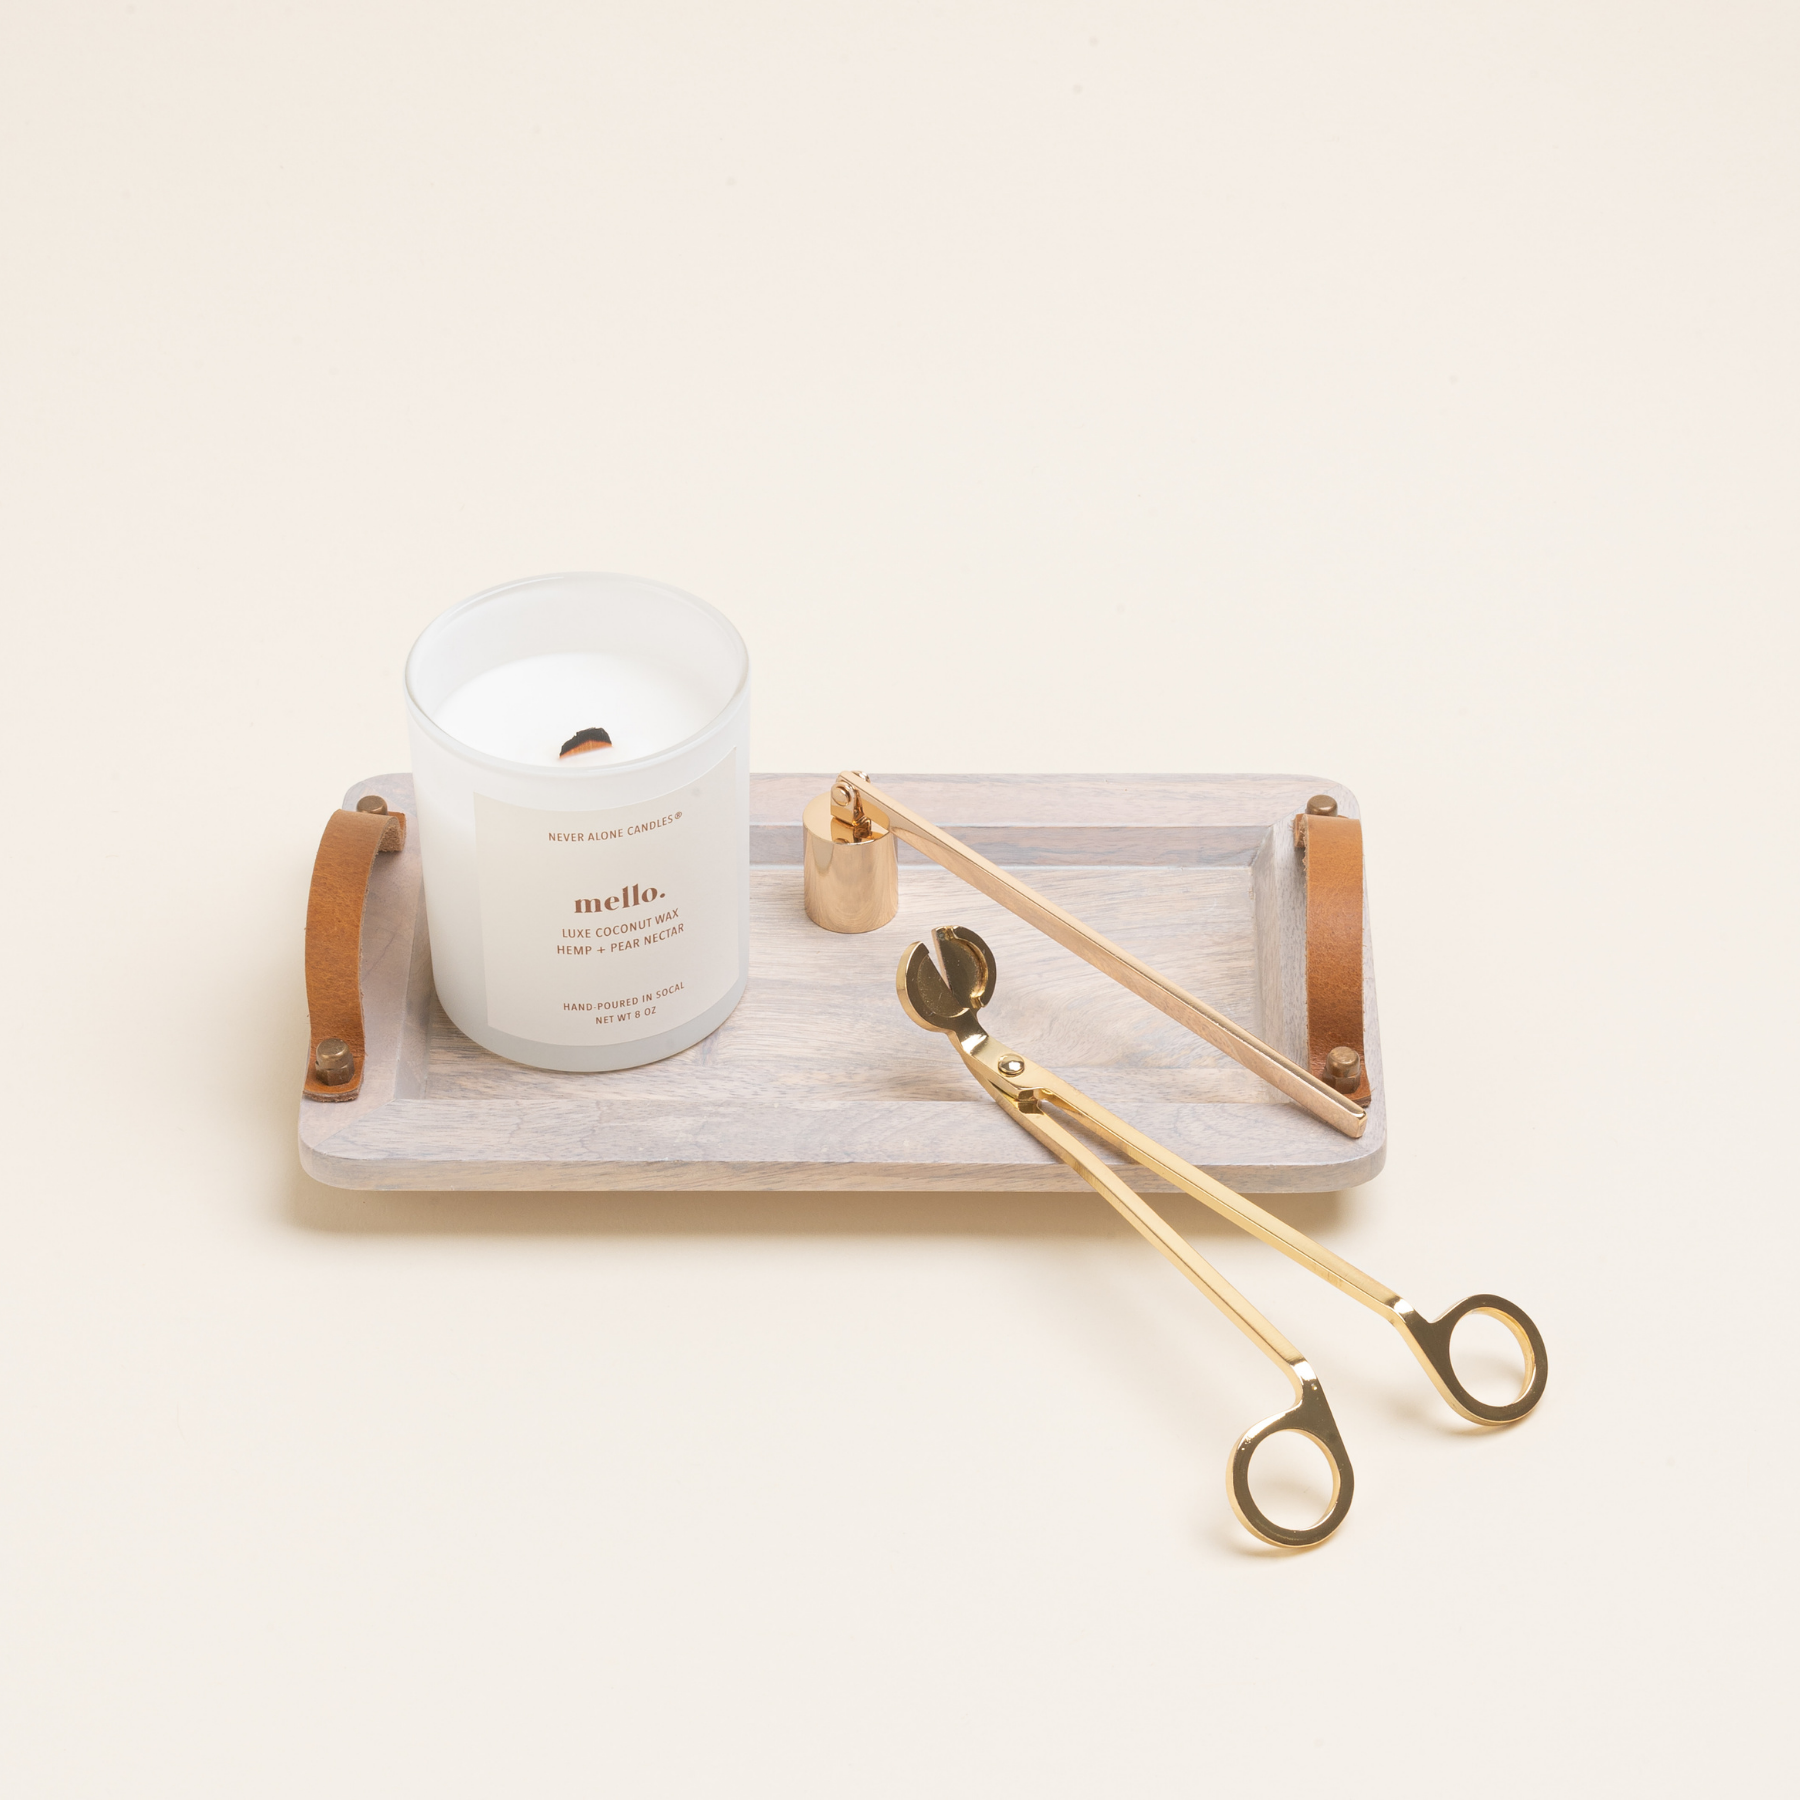 Candle accessories that help keep candles lasting longer